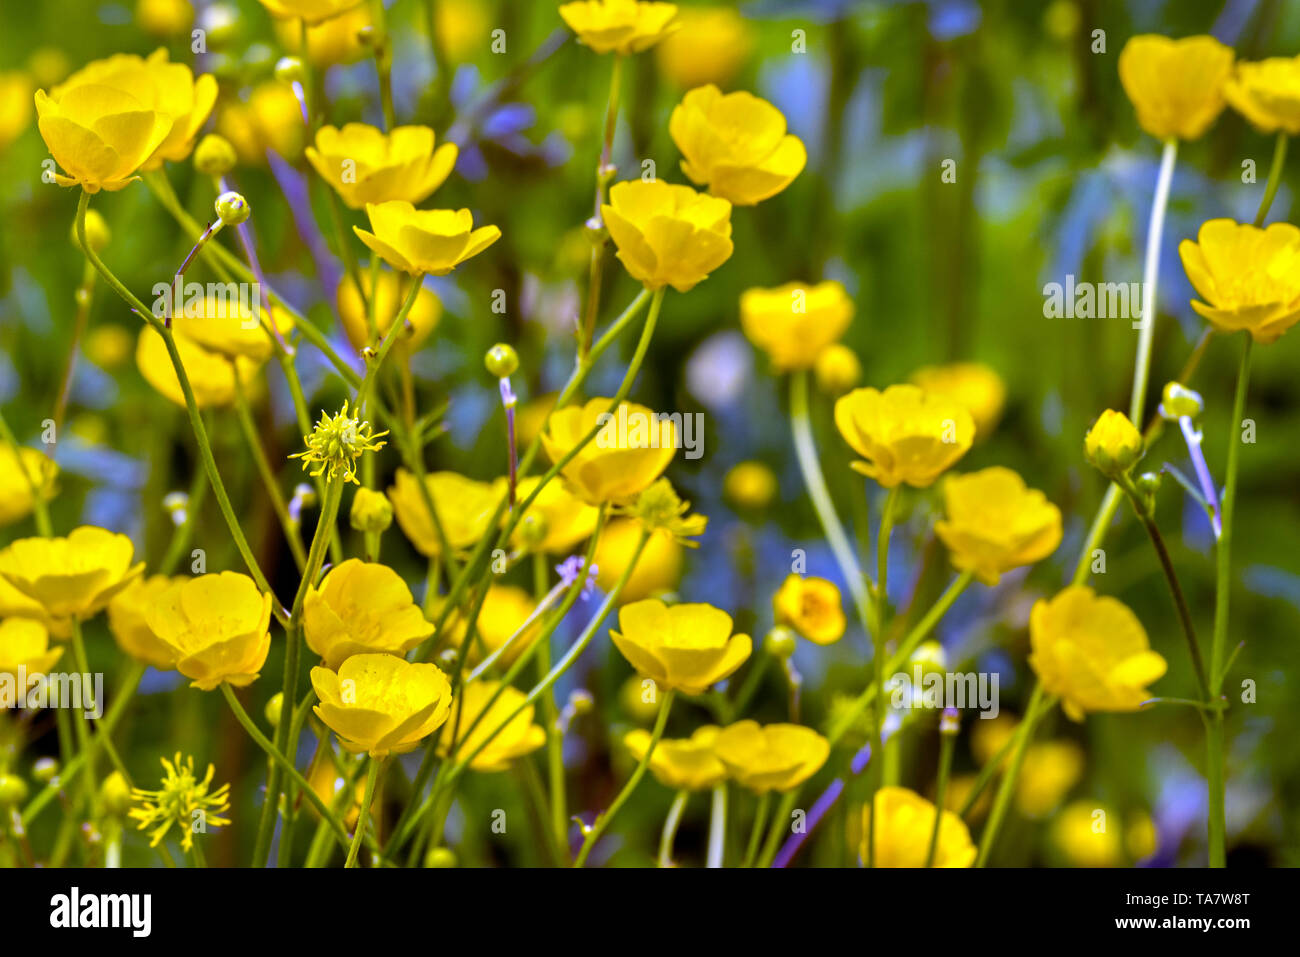 Meadow buttercup / tall buttercup / common buttercup / giant buttercup (Ranunculus acris) in flower Stock Photo